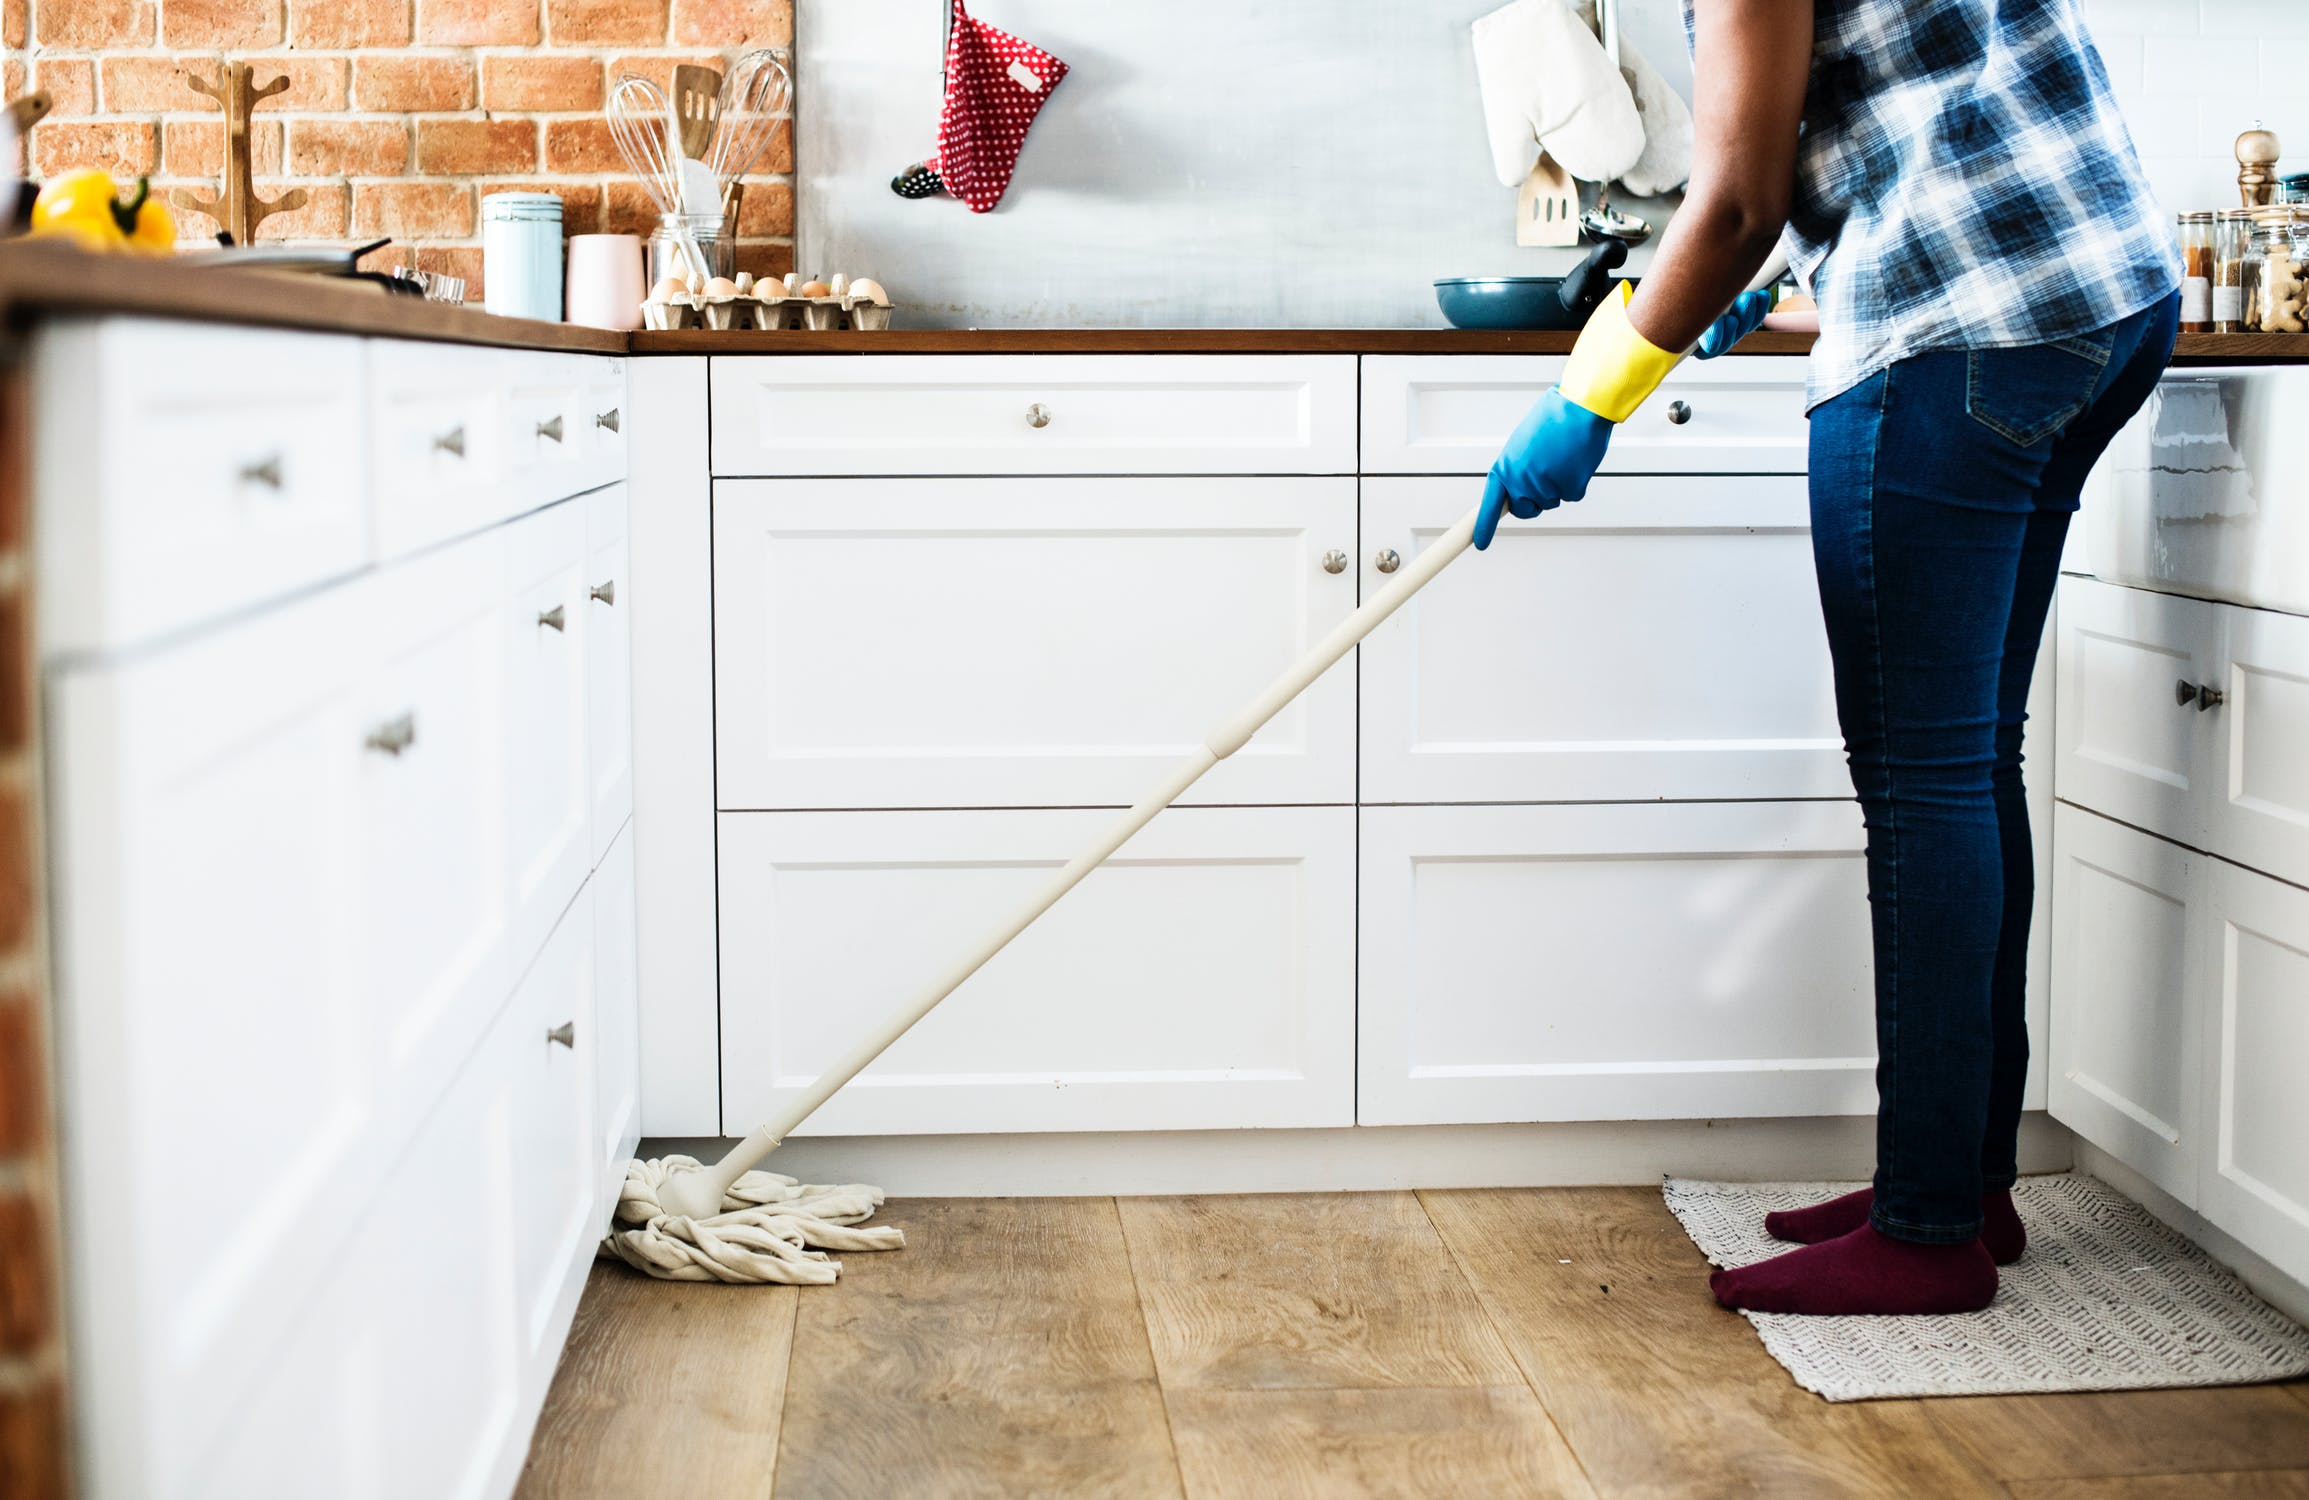 Too-Clean Homes Are Harmful To Health